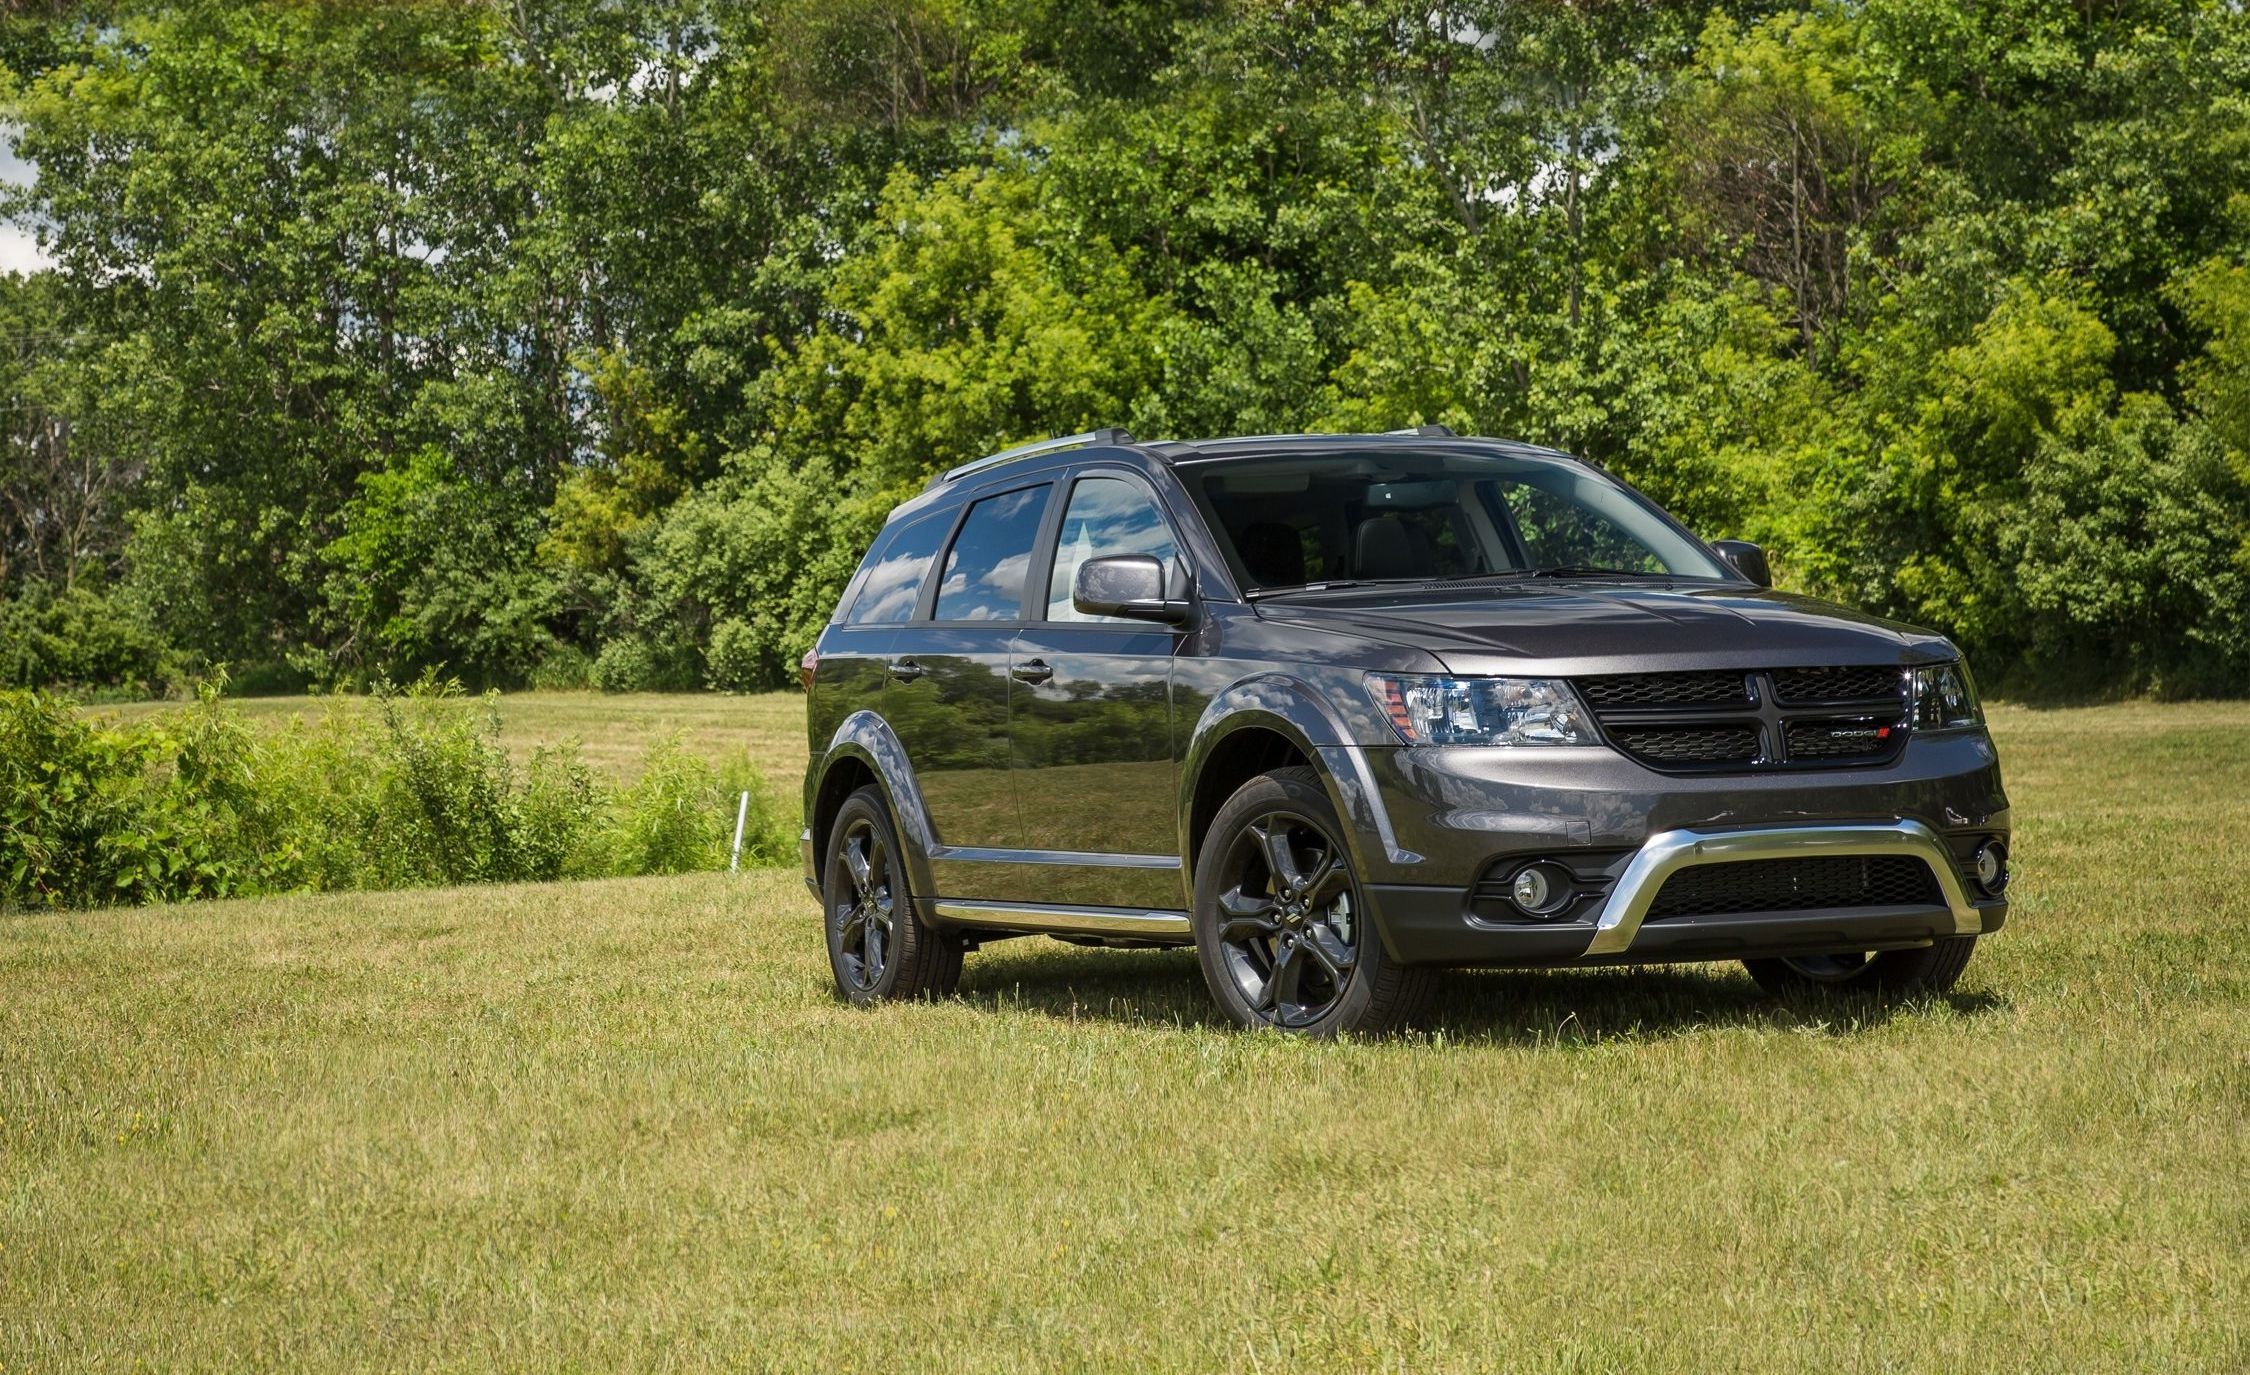 dodge journey models 2019 3 Dodge Journey Review, Pricing, and Specs